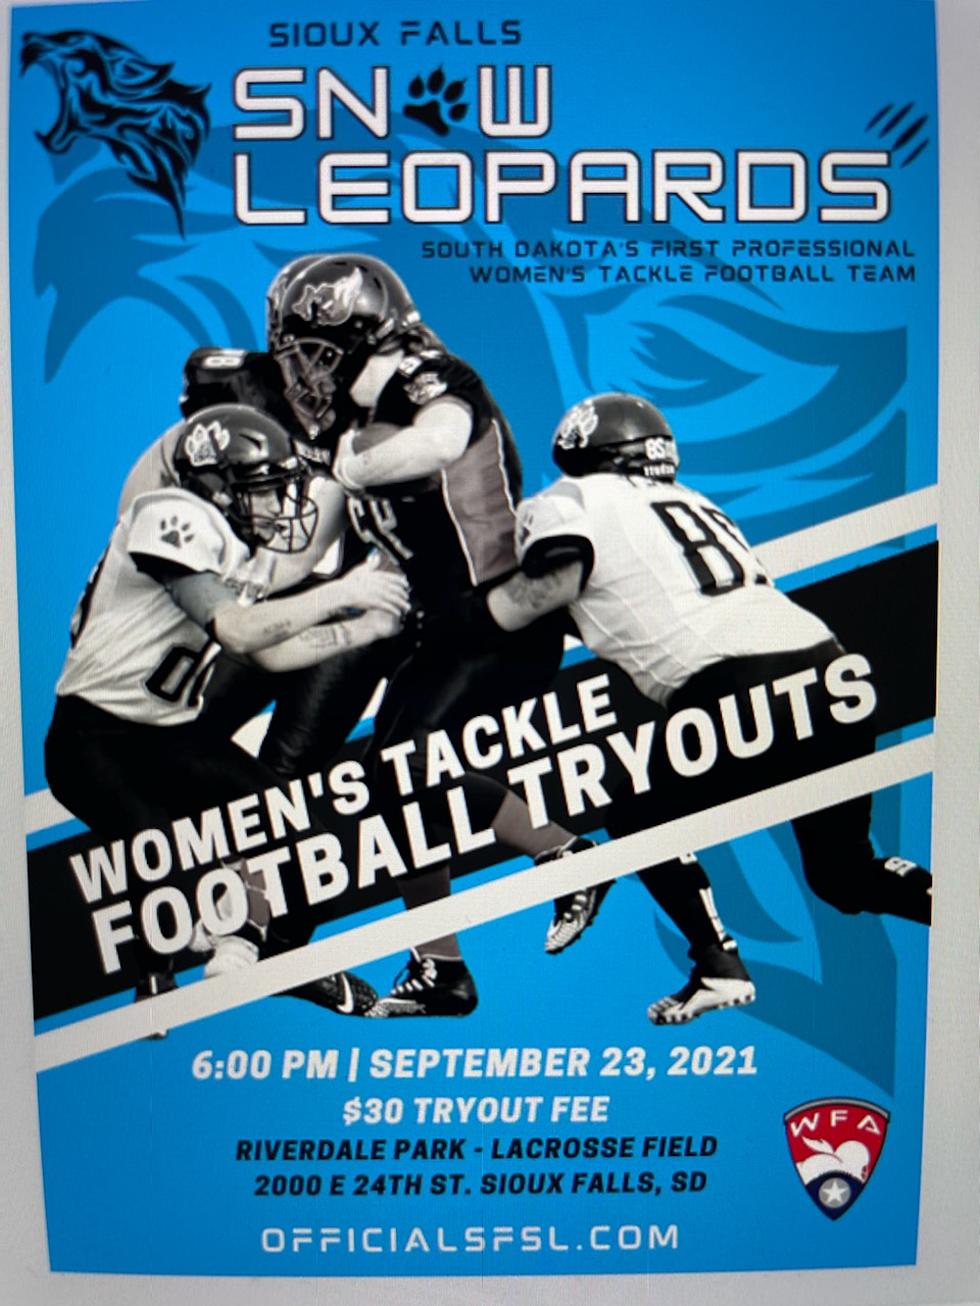 Women’s Pro Football Tryouts In Sioux Falls Sept 23